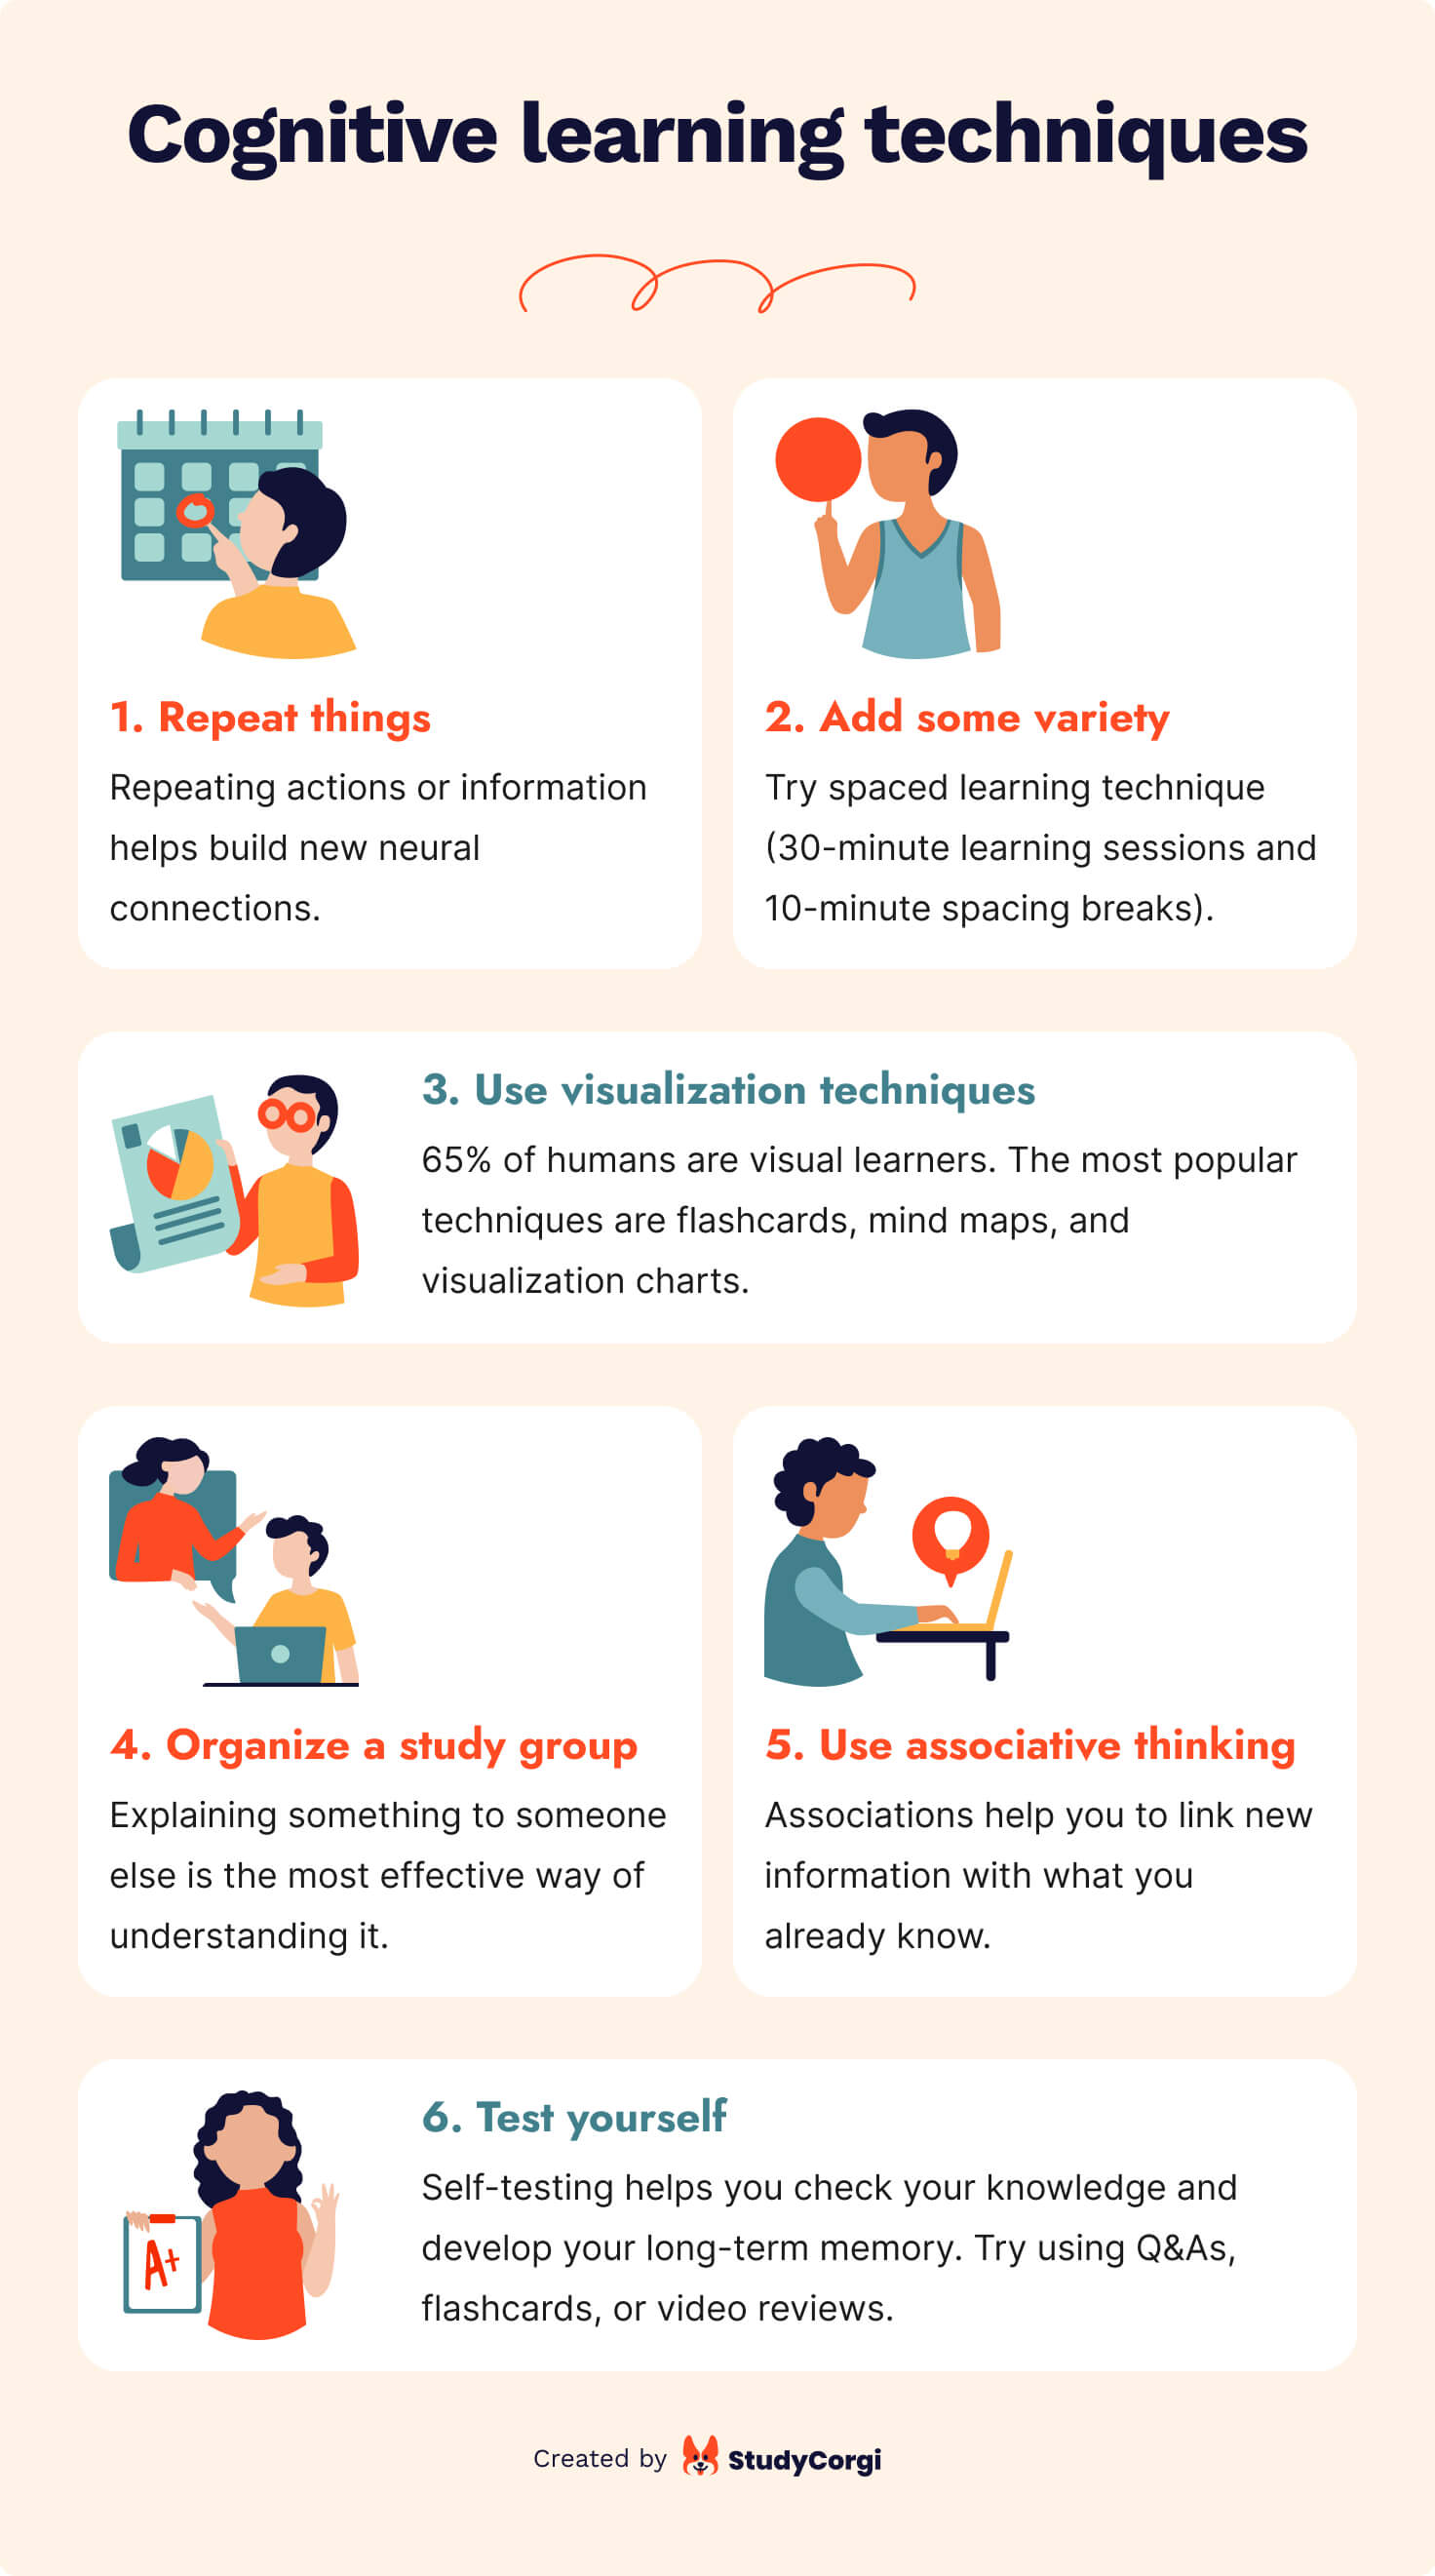 The picture lists the most effective cognitive learning techniques for students.